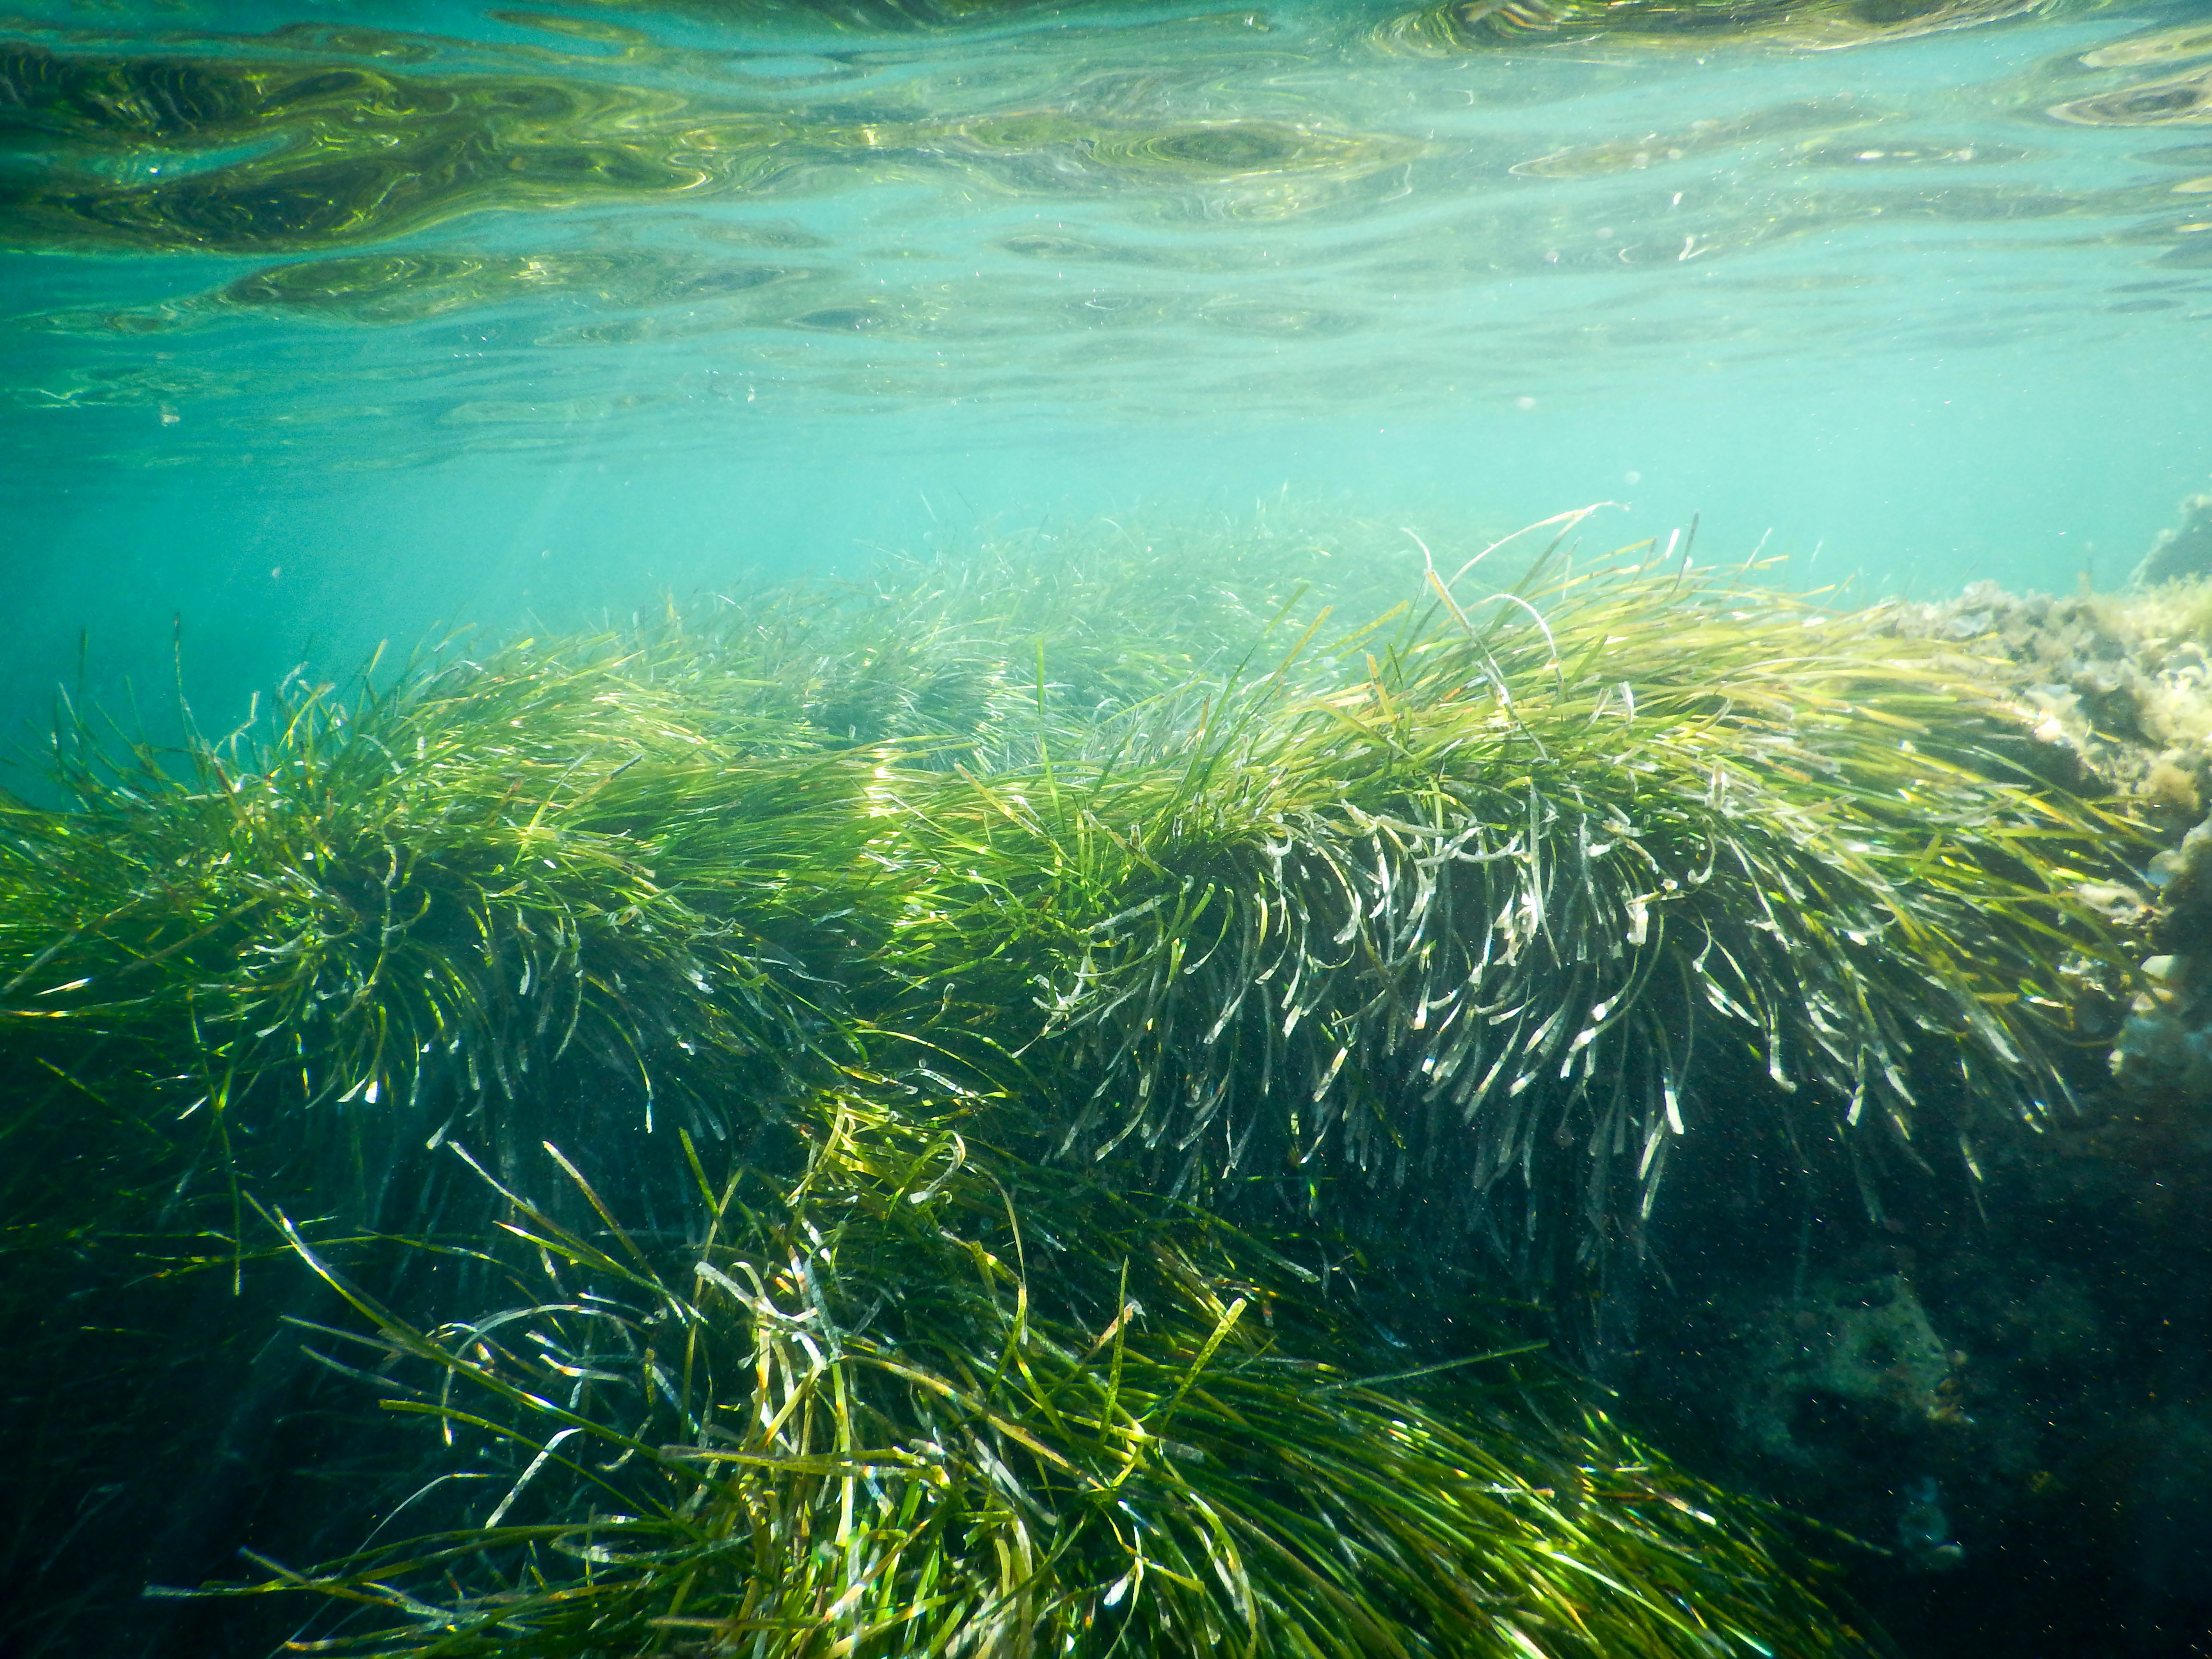 A photo of seagrass swaying in turquiose water